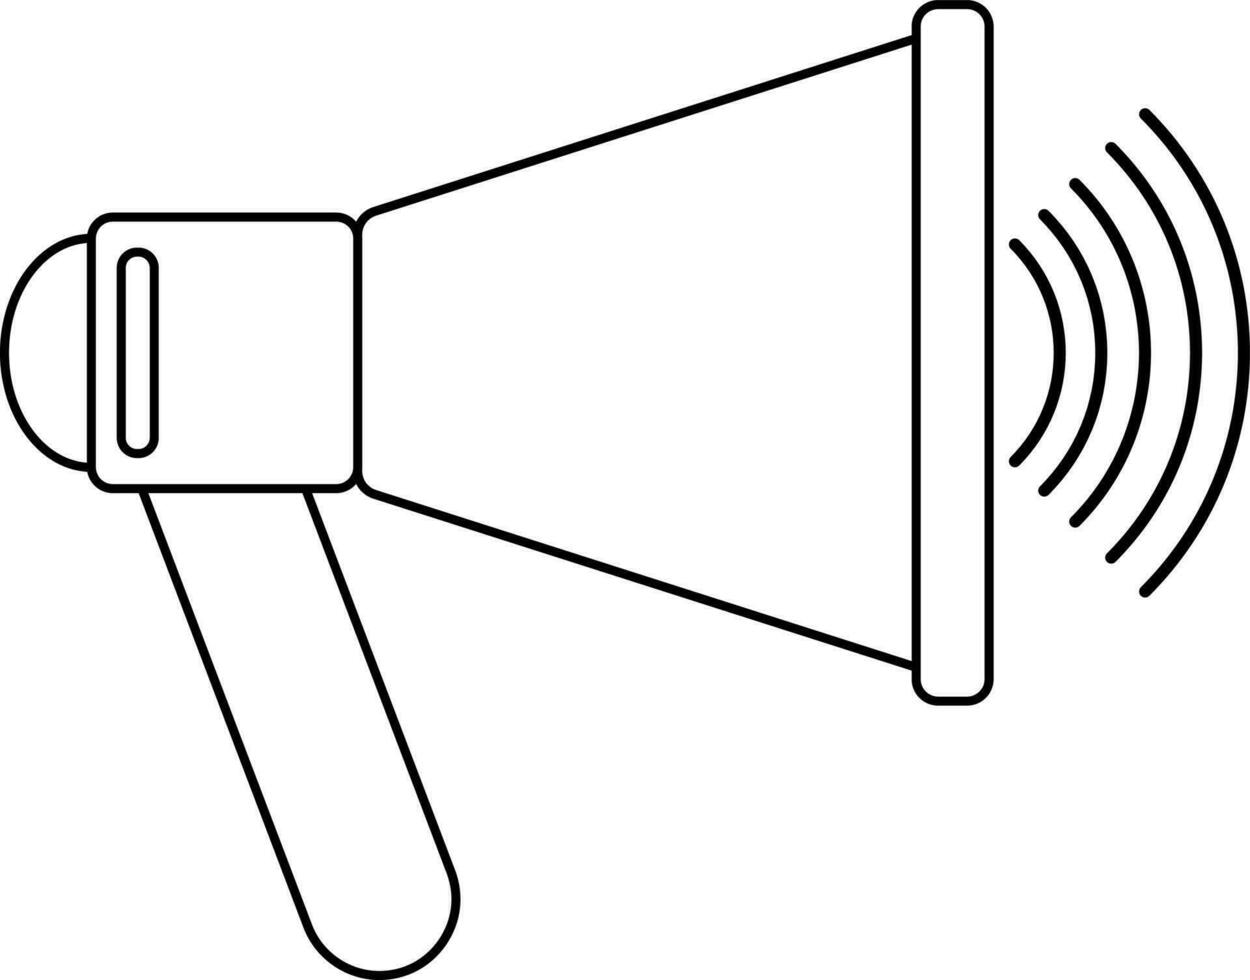 Megaphone icon for speaking concept. vector